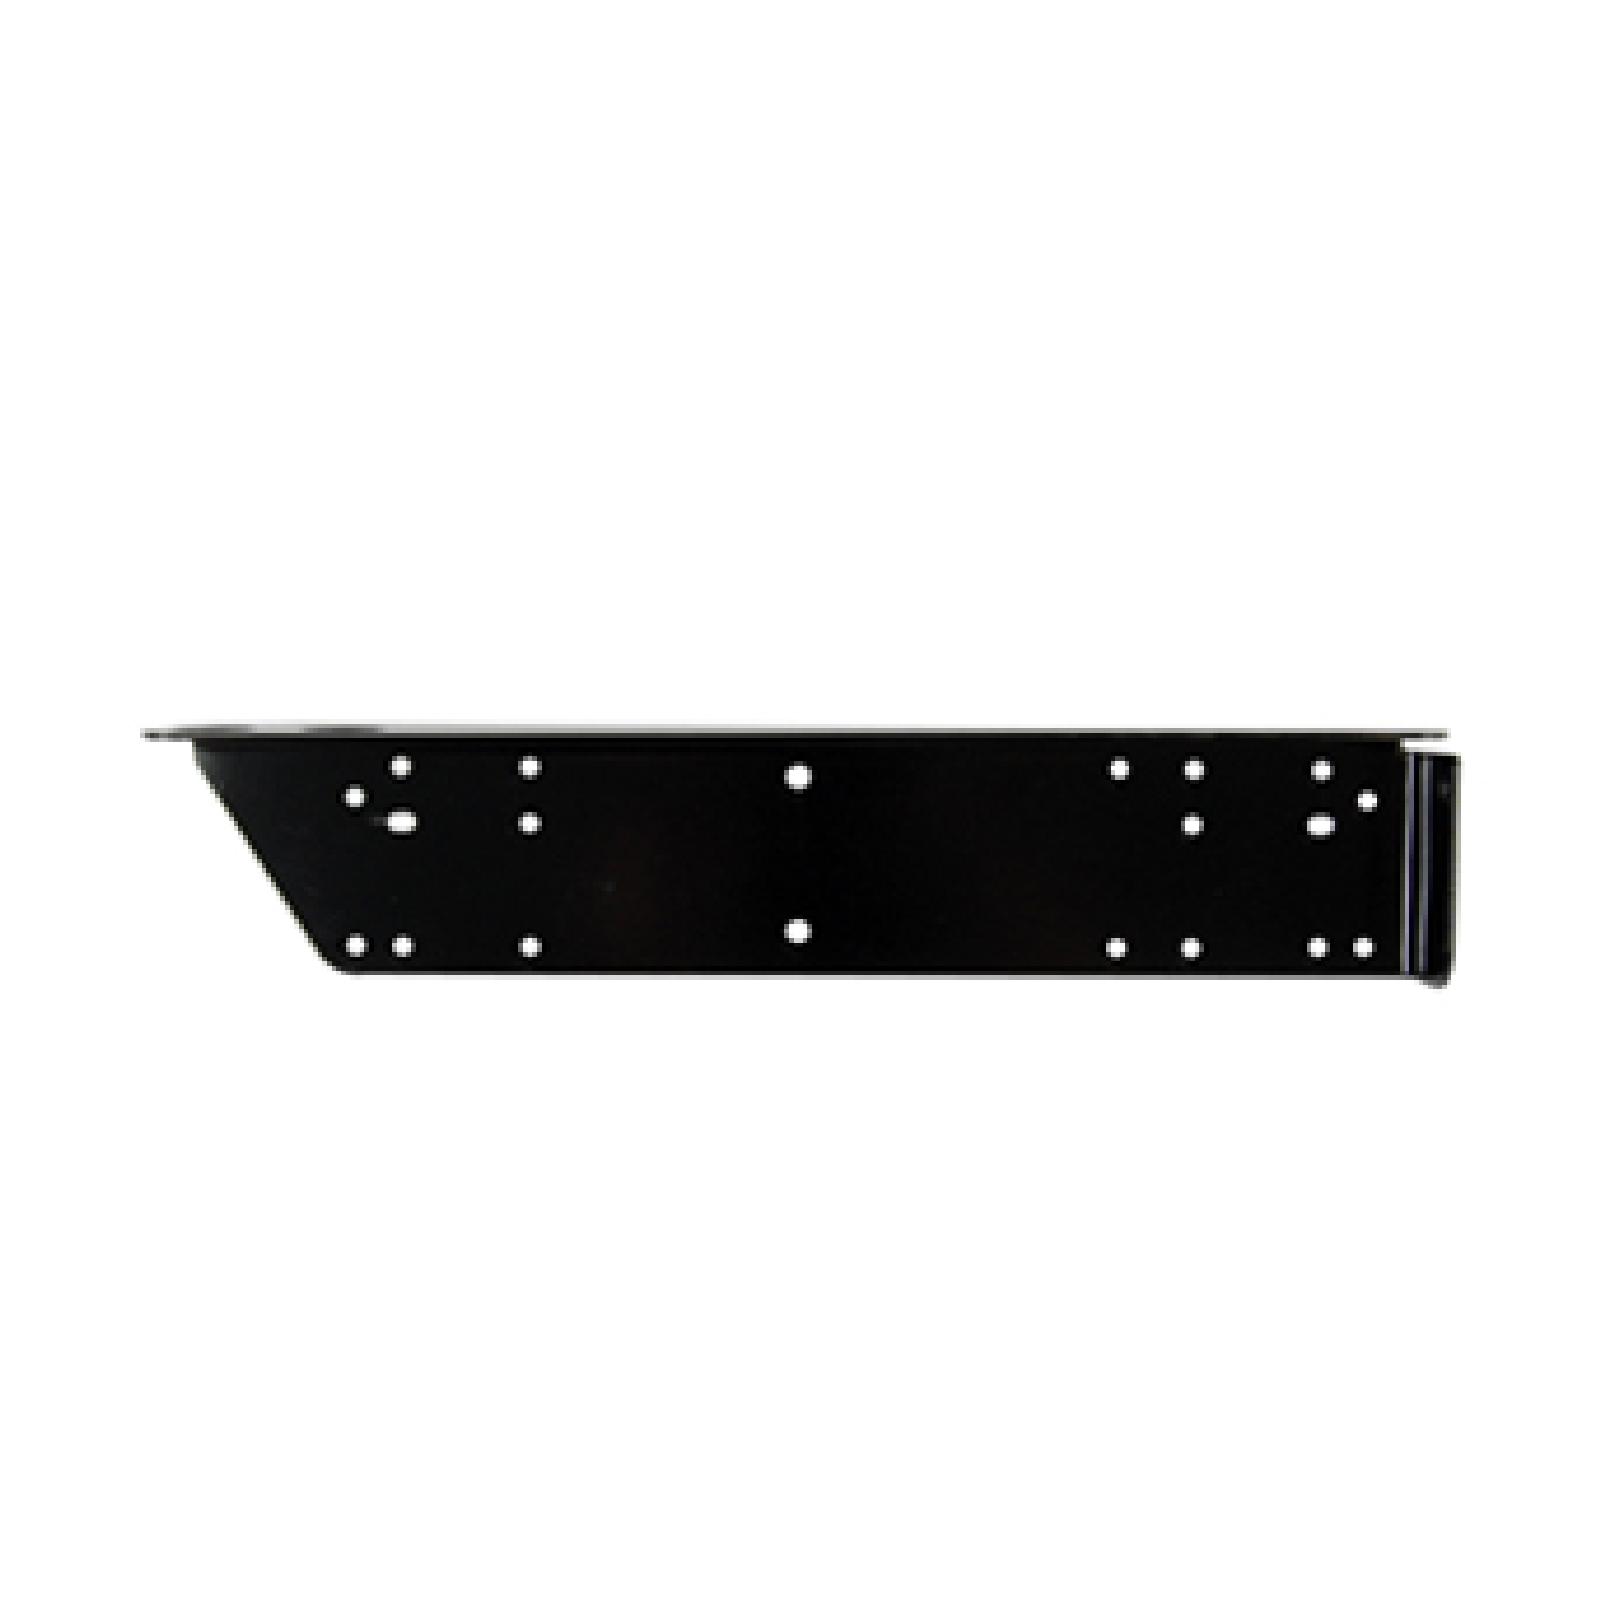 BRACKET MOUNTING part# 16587D-0637 by MTD